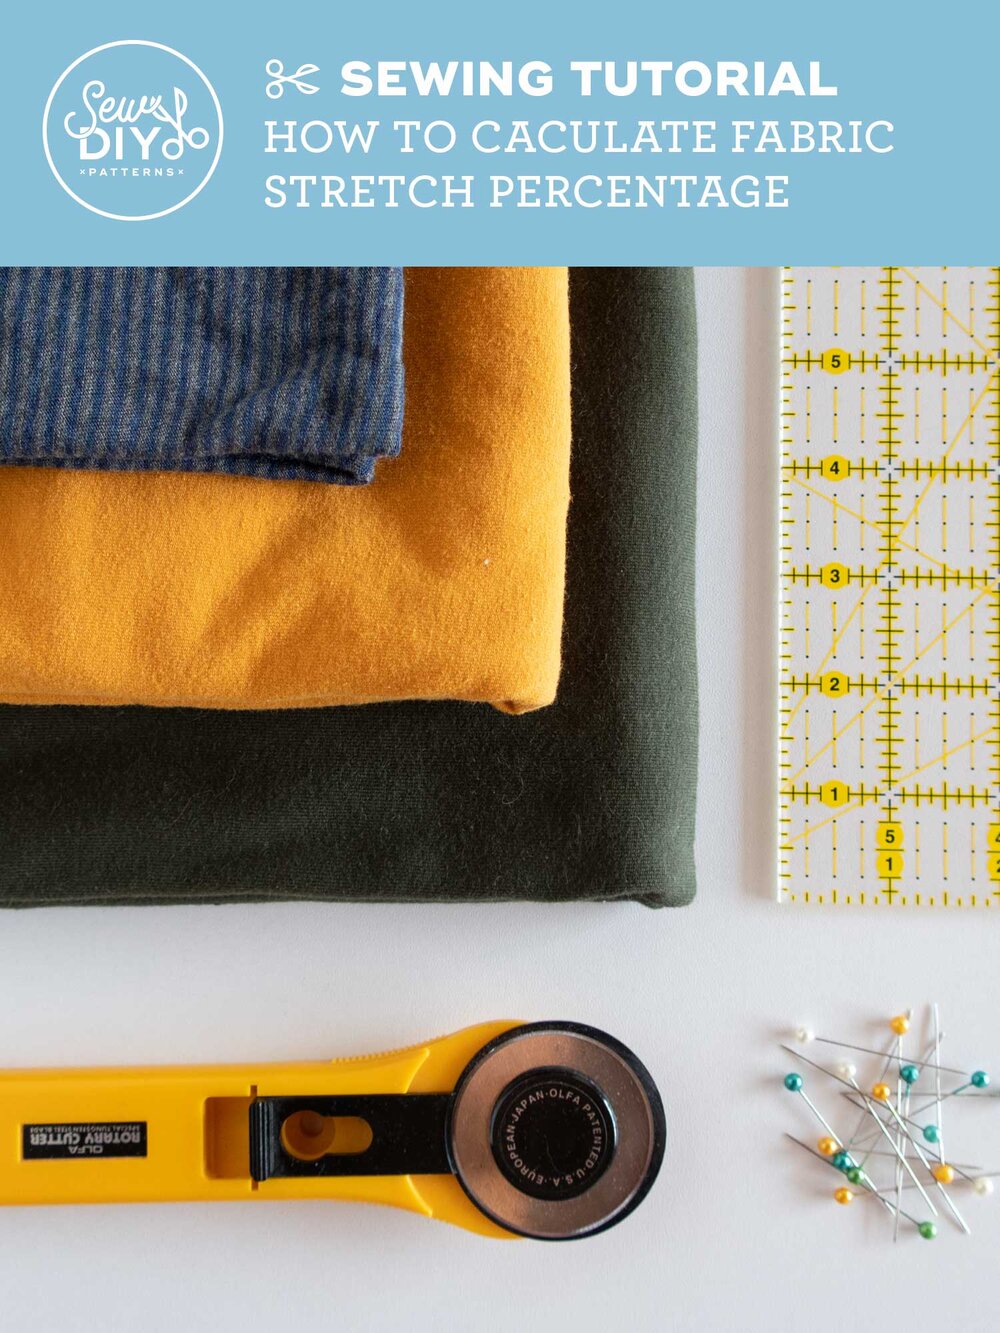 How to calculate fabric stretch percentage - Video tutorial